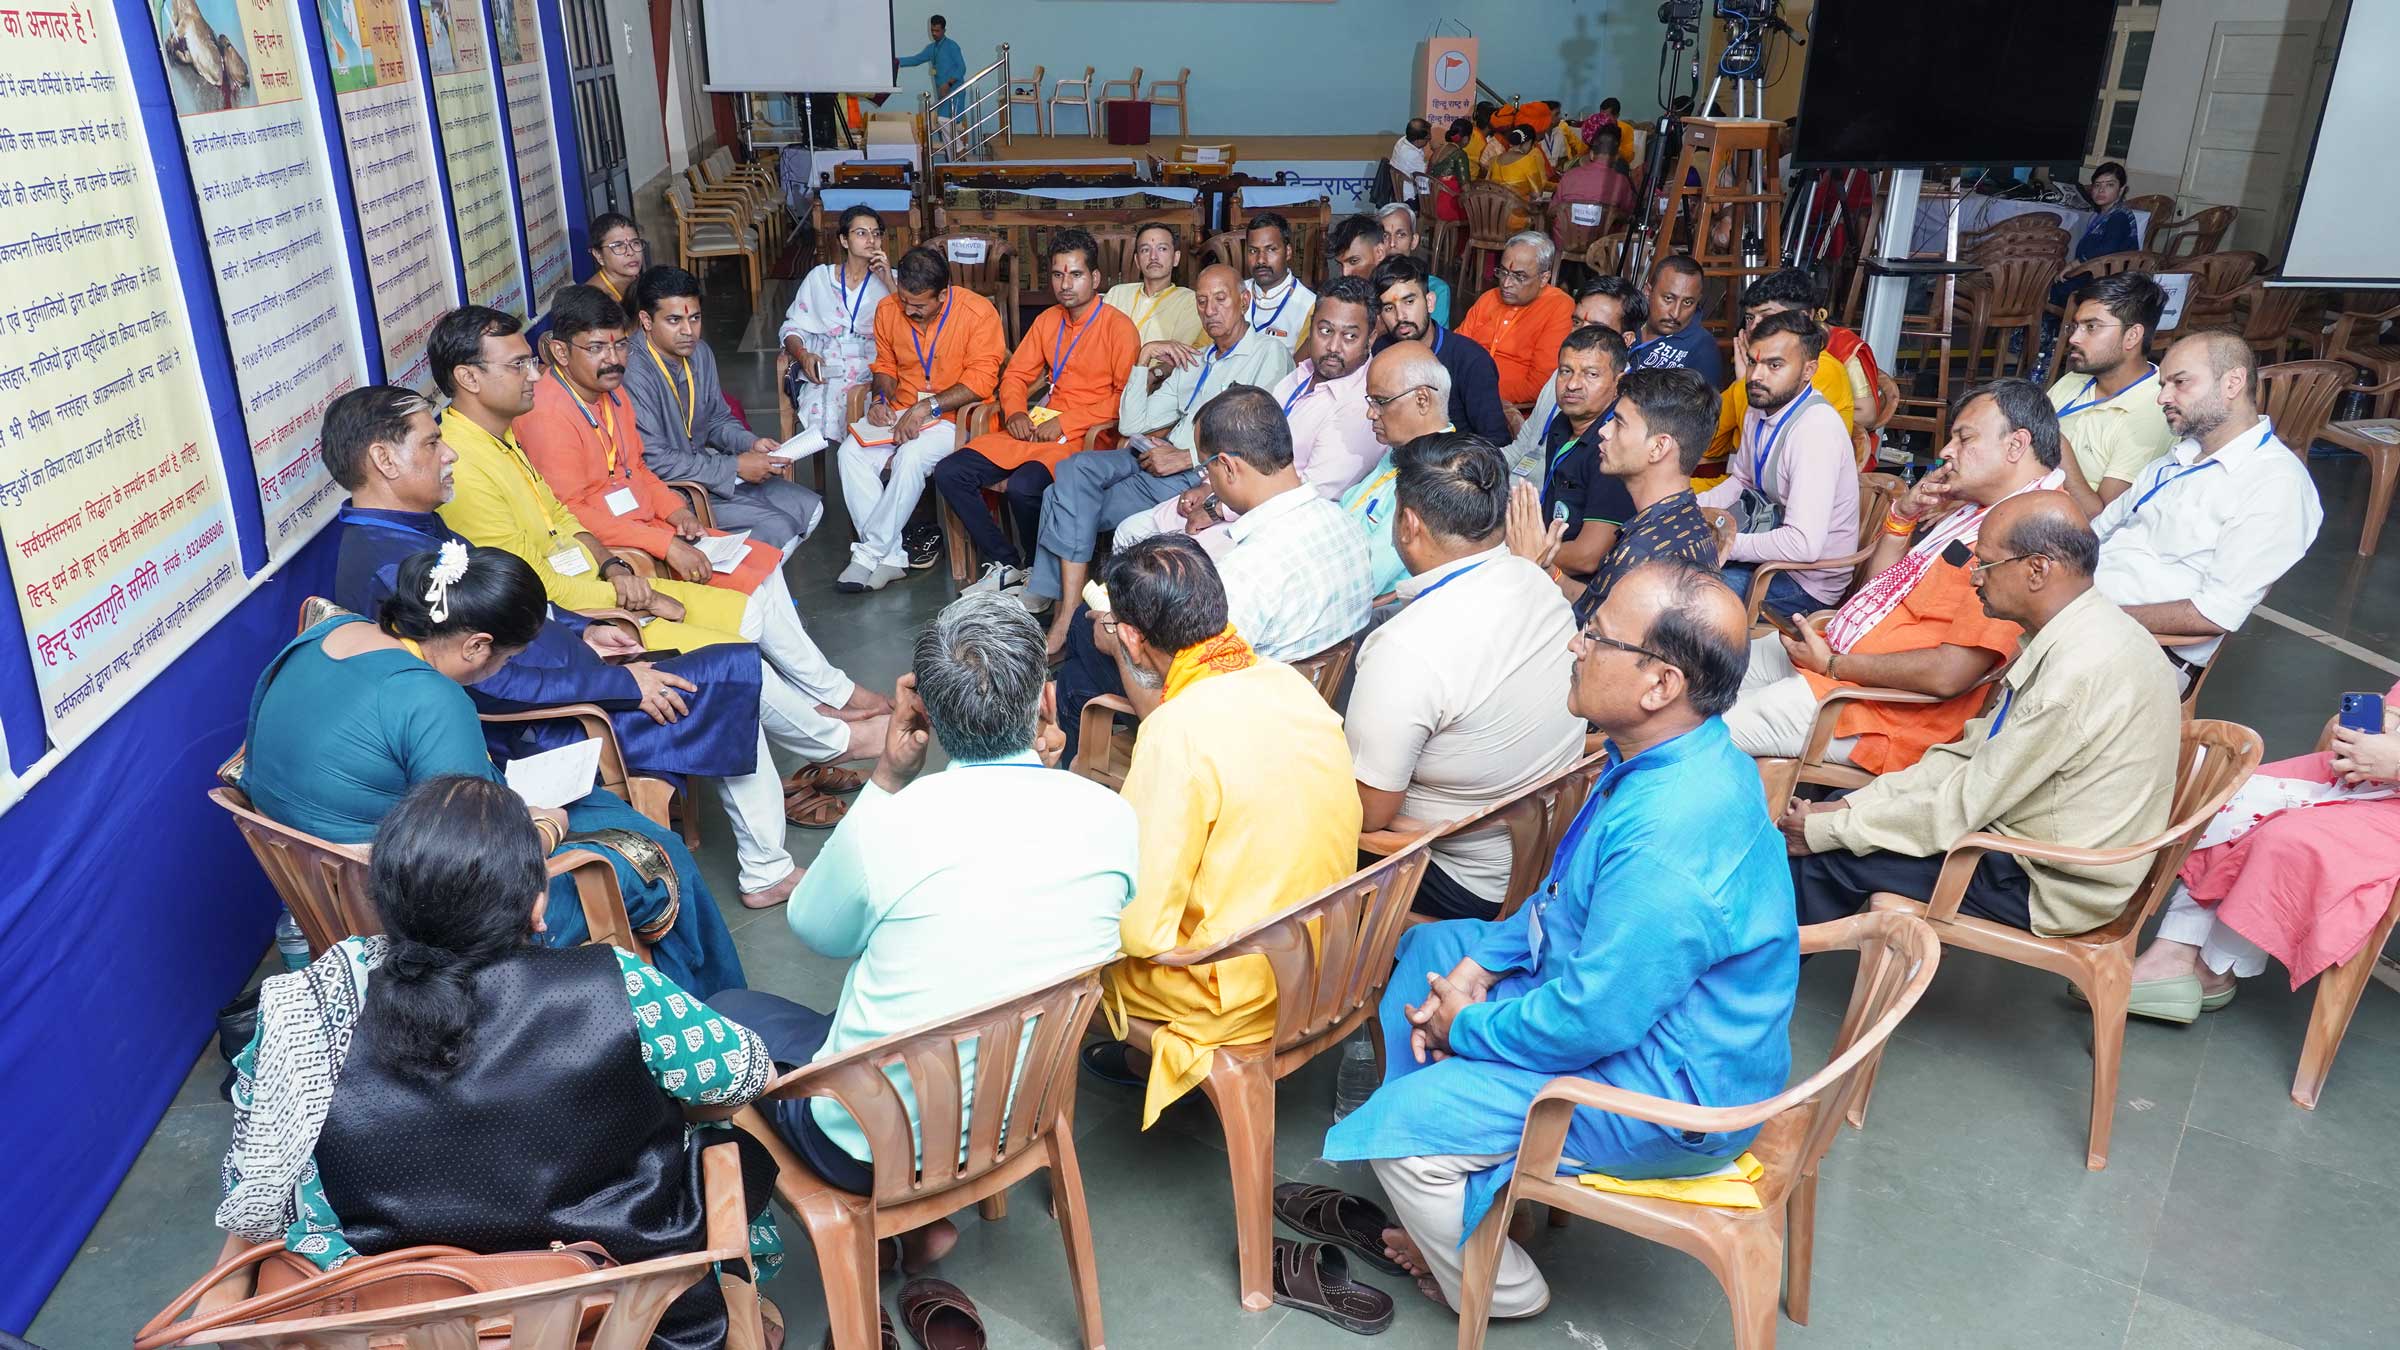 Devout Hindus discussing what can be done unitedly to preserve the sanctity and culture of temples